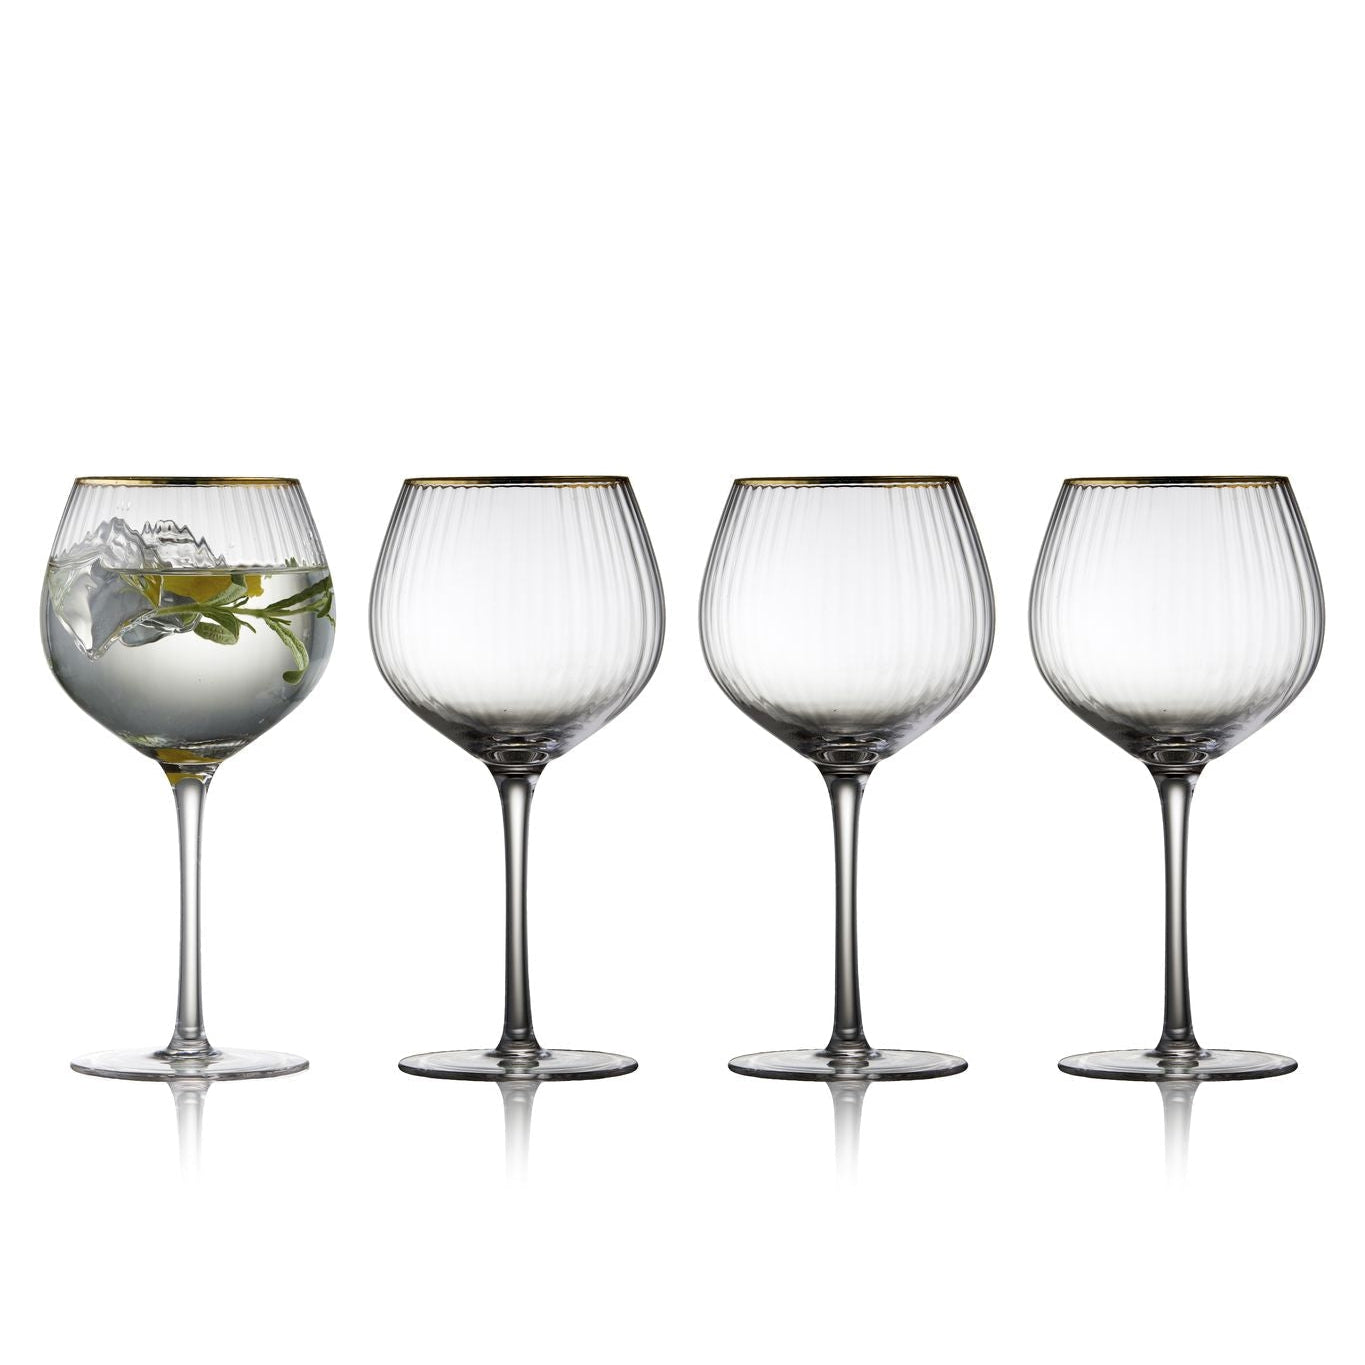 Lyngby Glas Palermo Gold Gin & Tonic Glass 65 Cl, 4 st.